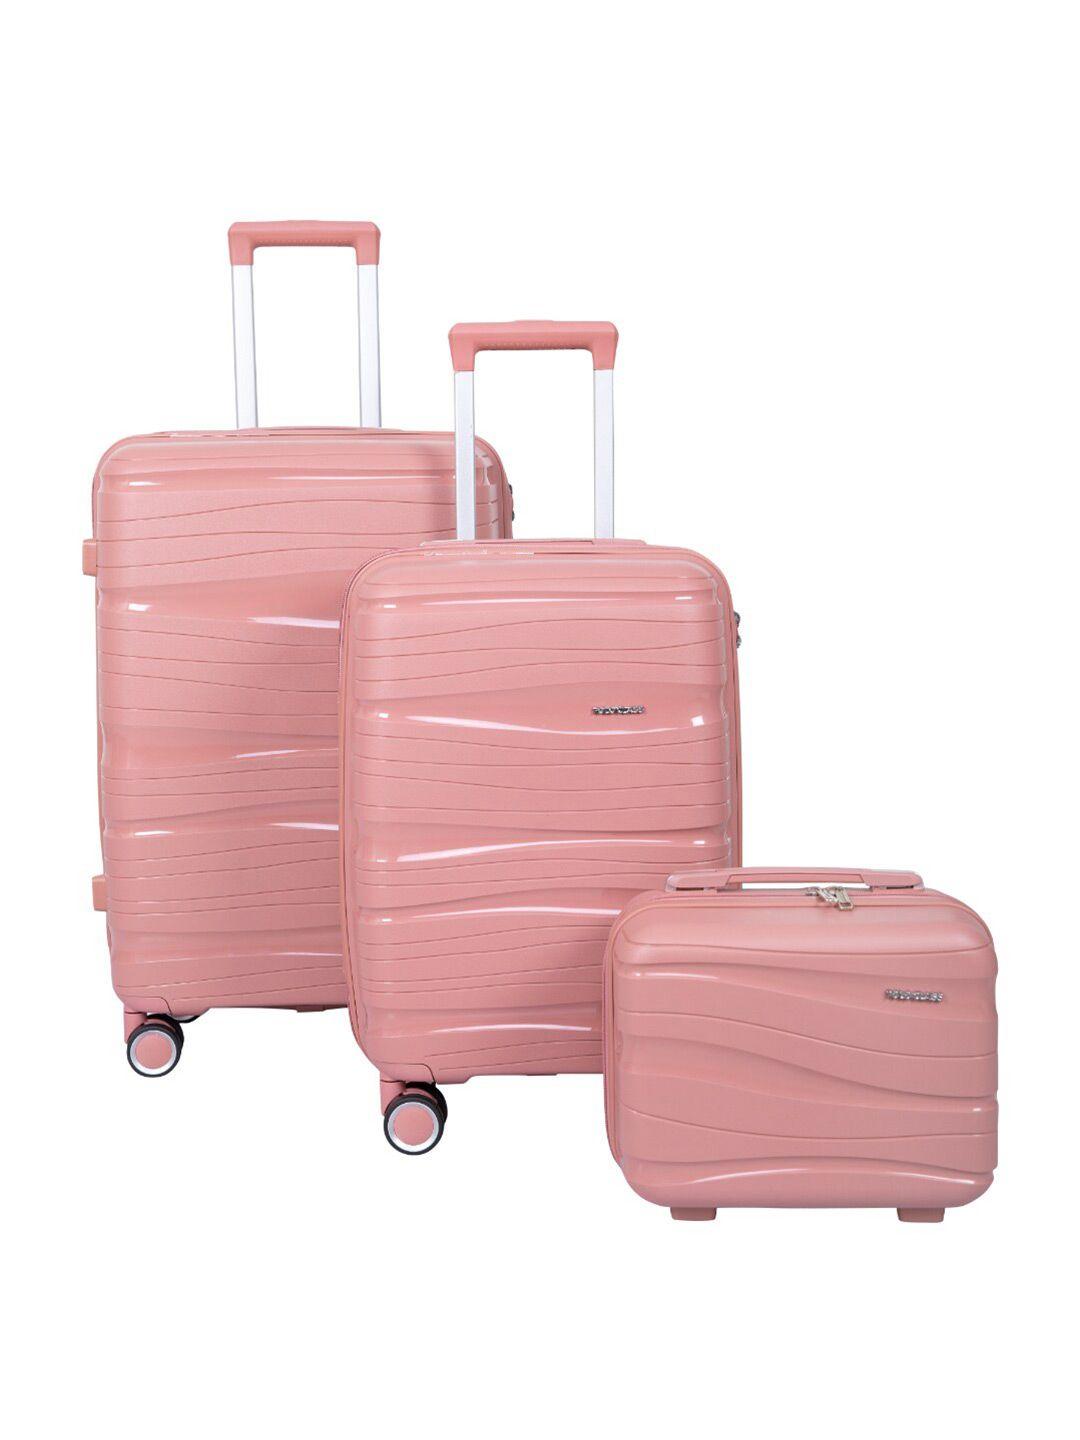 polo class set of 3 textured hard-sided trolley suitcases bags